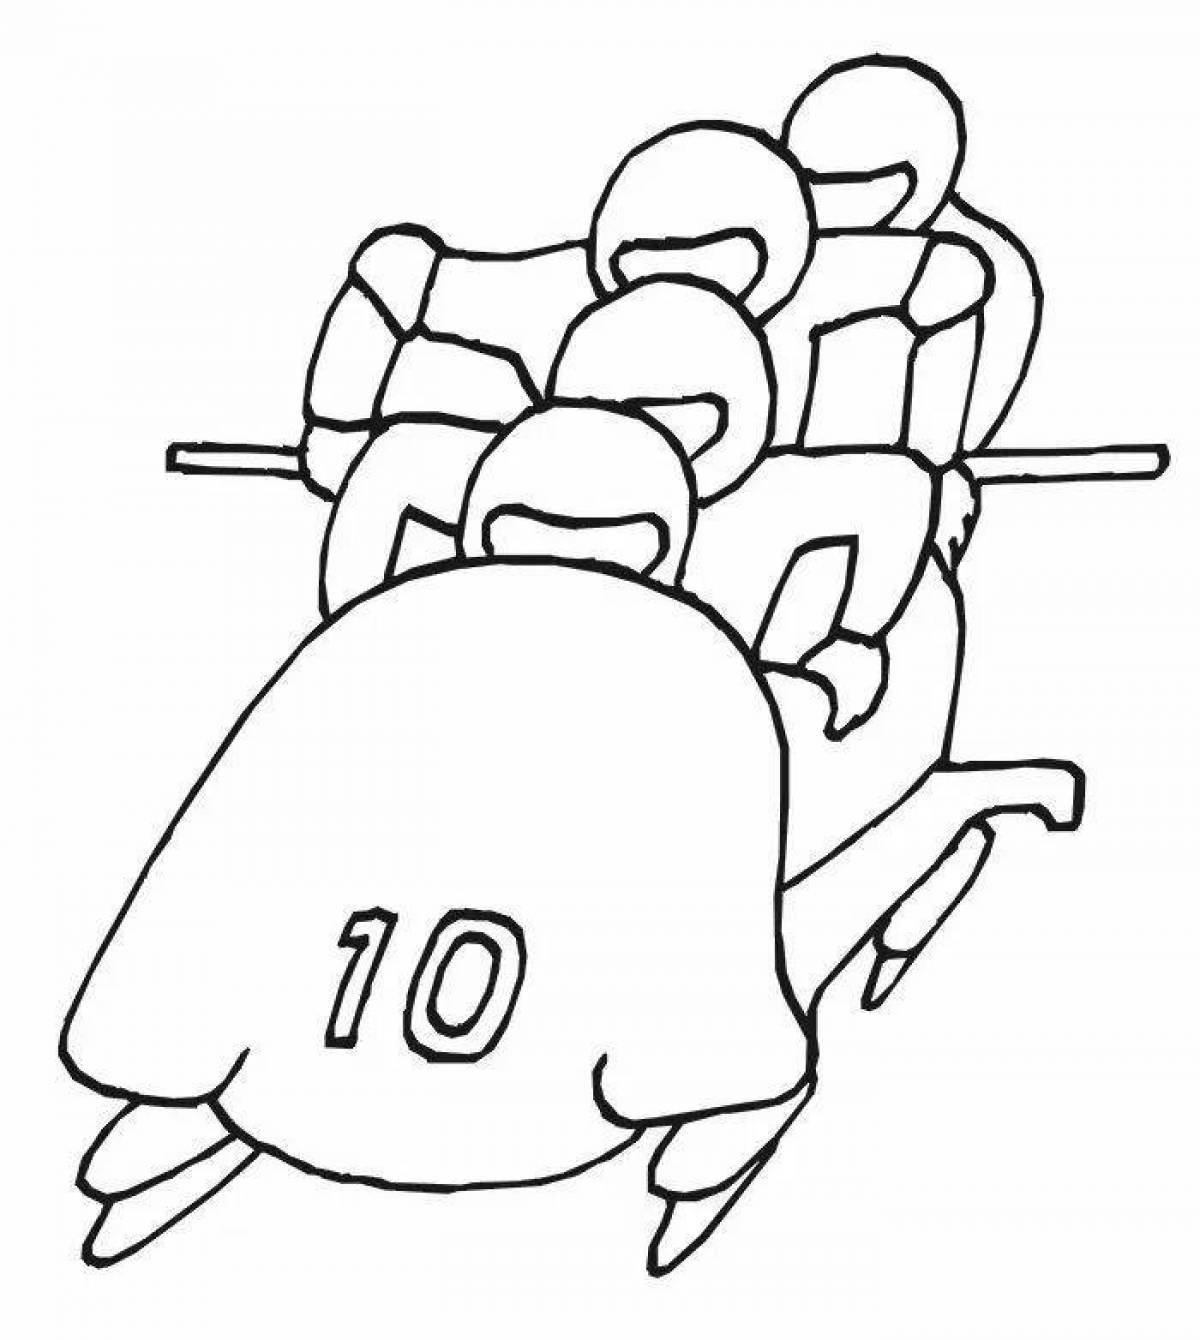 Fairy bobsleigh coloring page